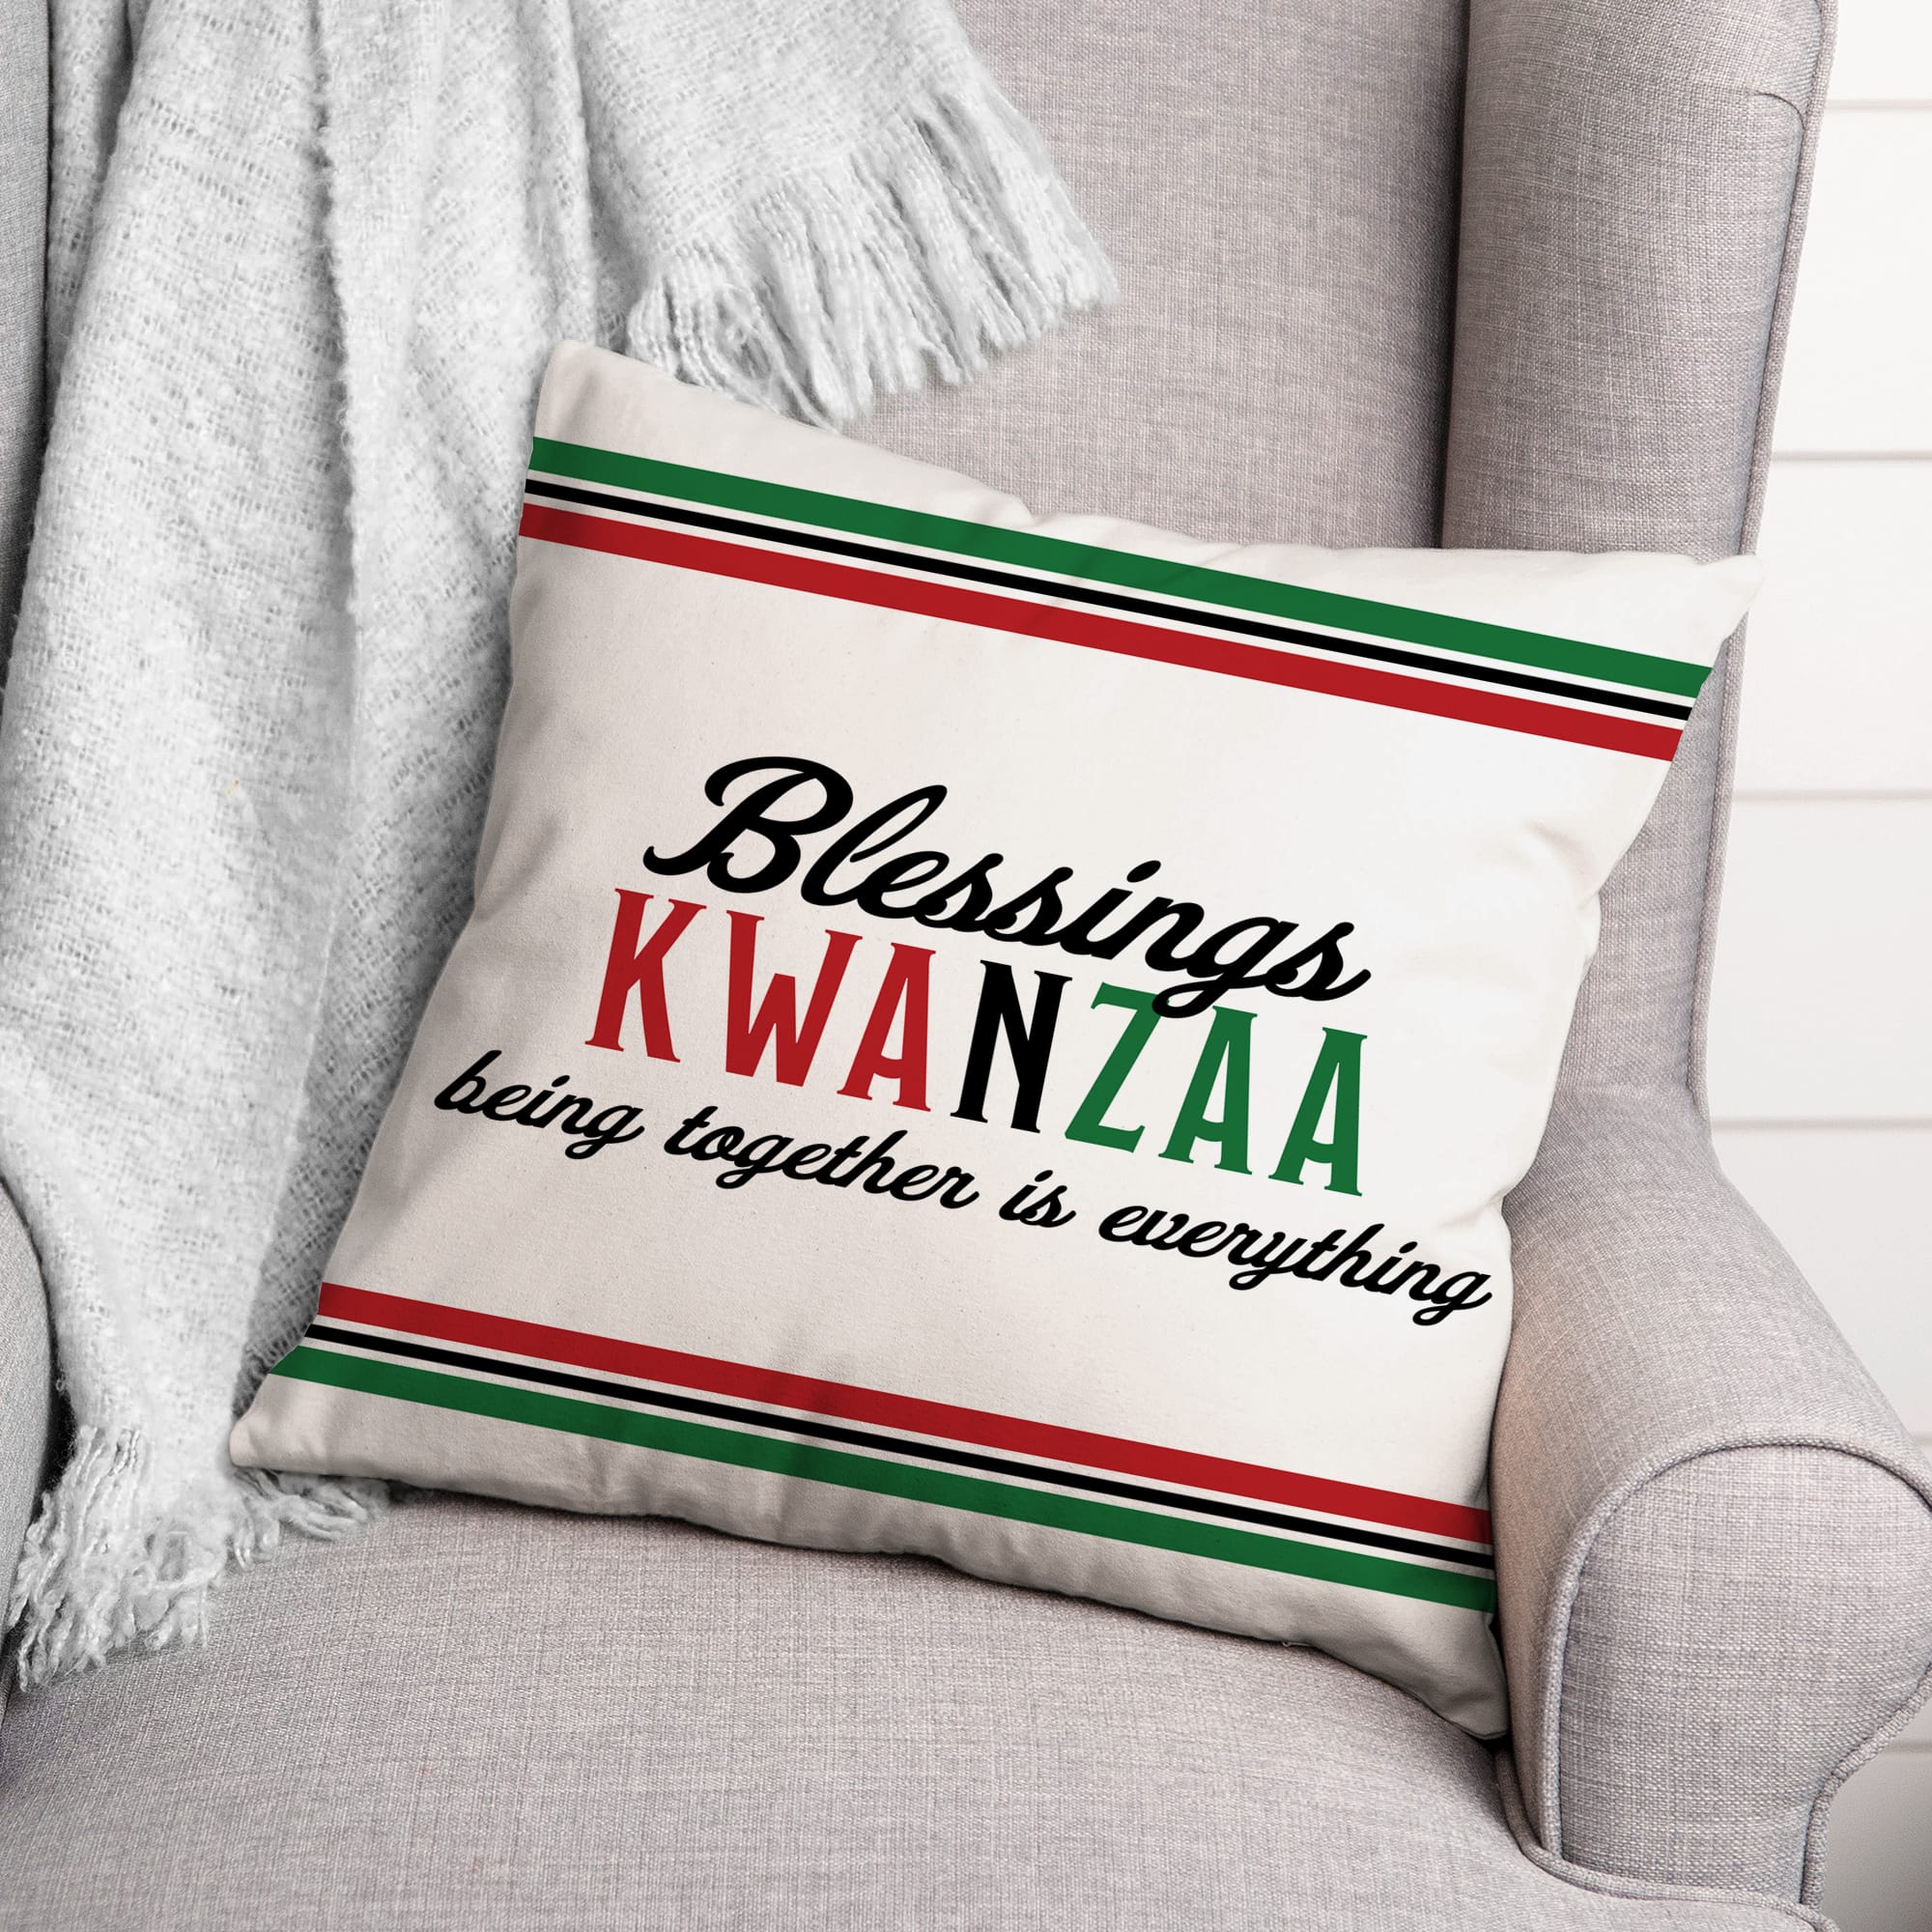 Blessings Kwanzaa Being Together is Everything Throw Pillow